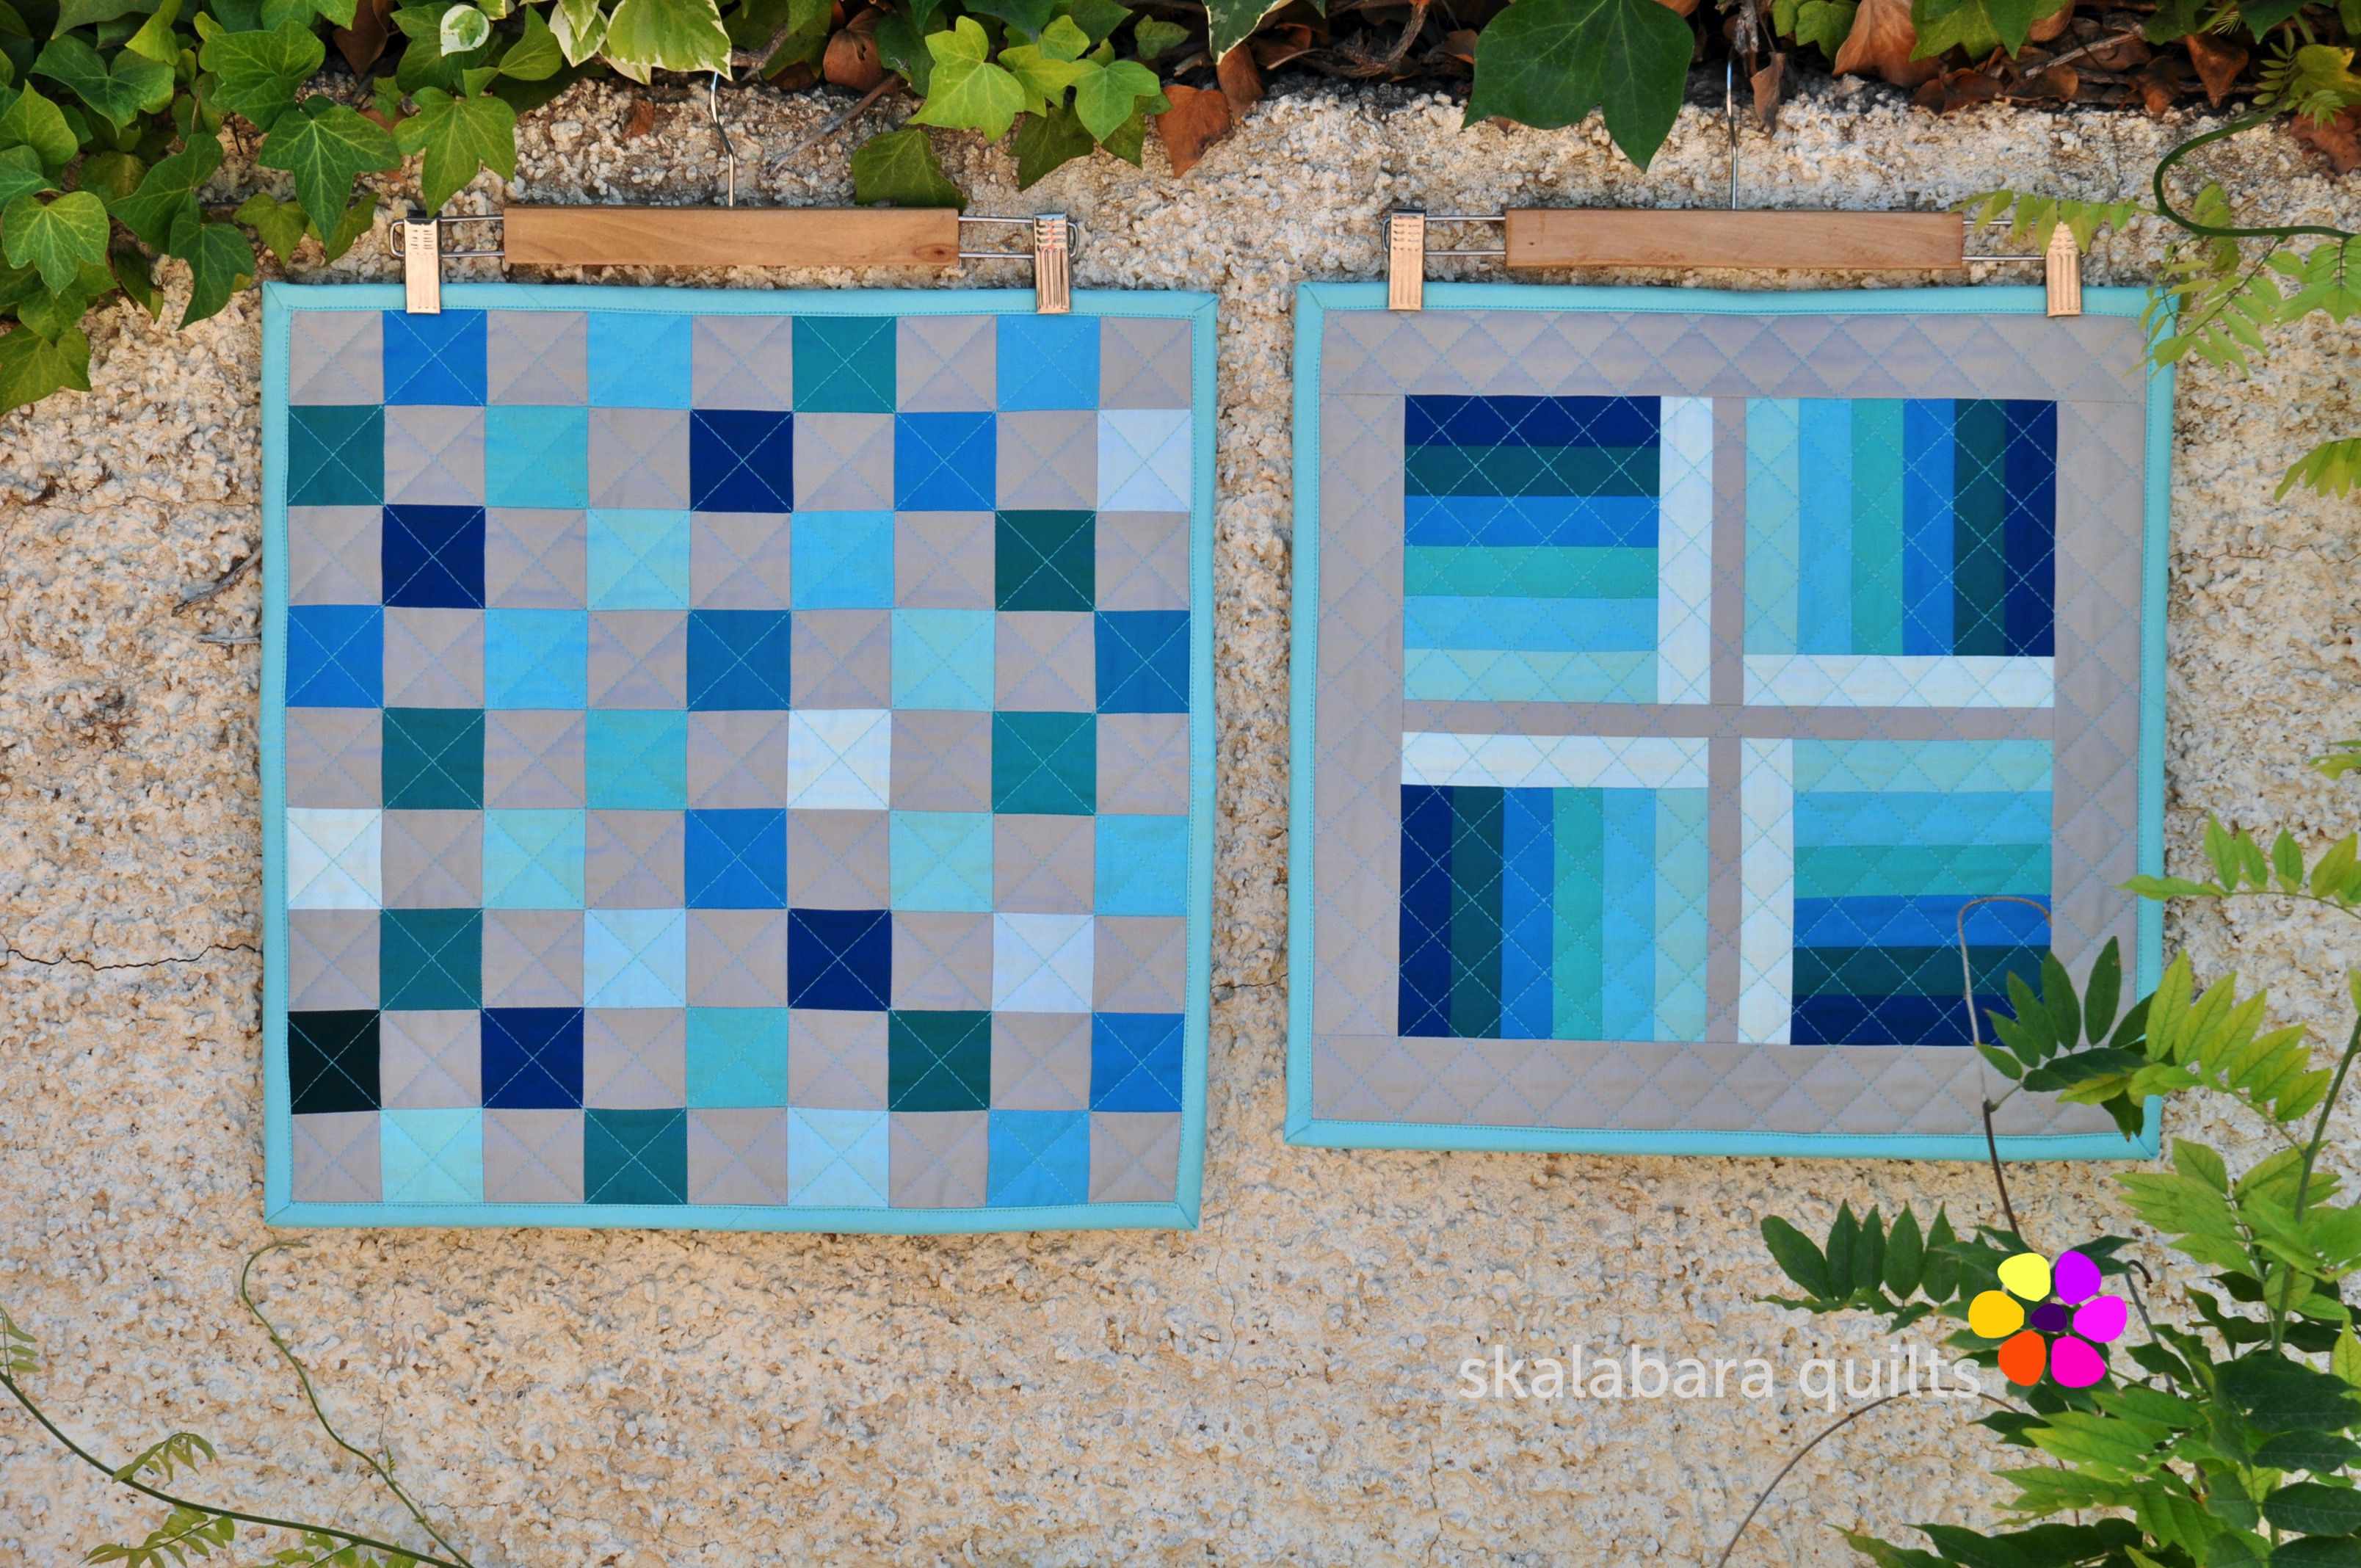 cushion covers in turquoise - skalabara quilts